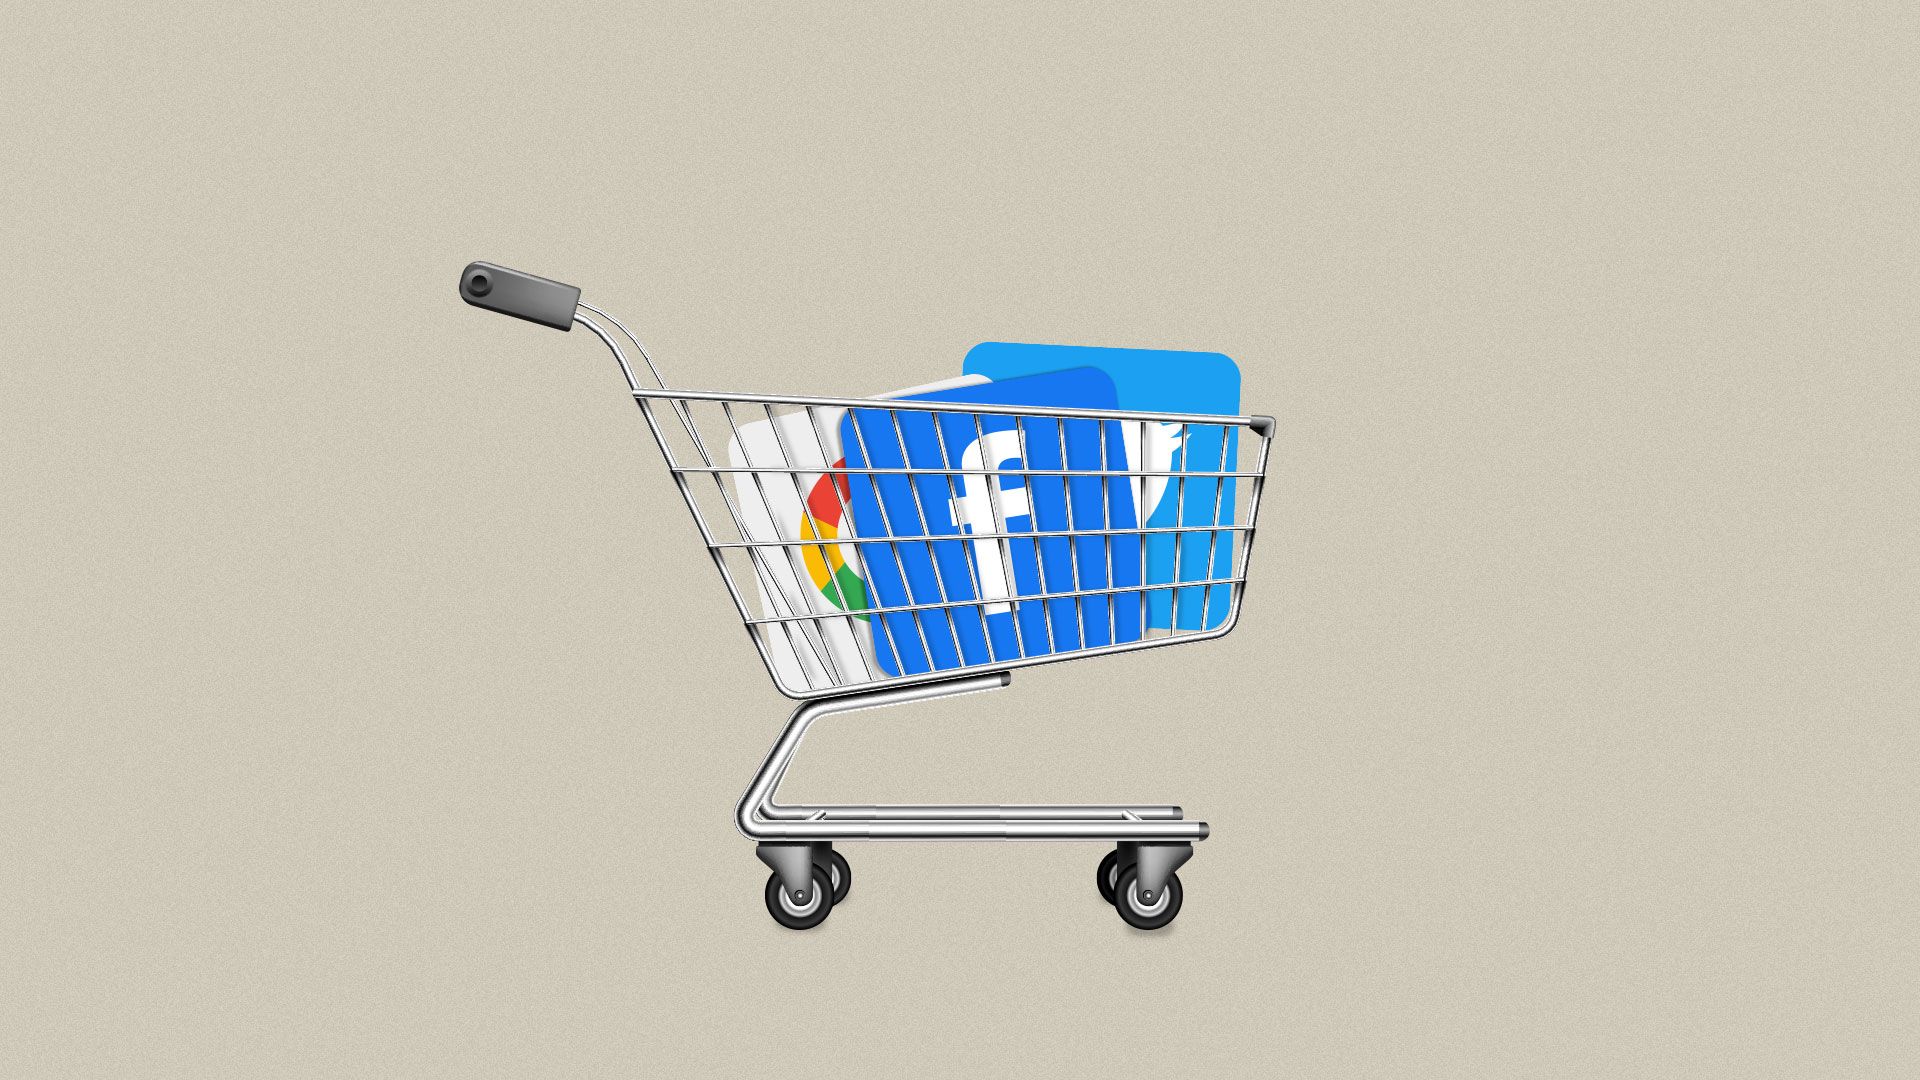 Illustration of shopping cart carrying Facebook, Twitter, and Google icons.